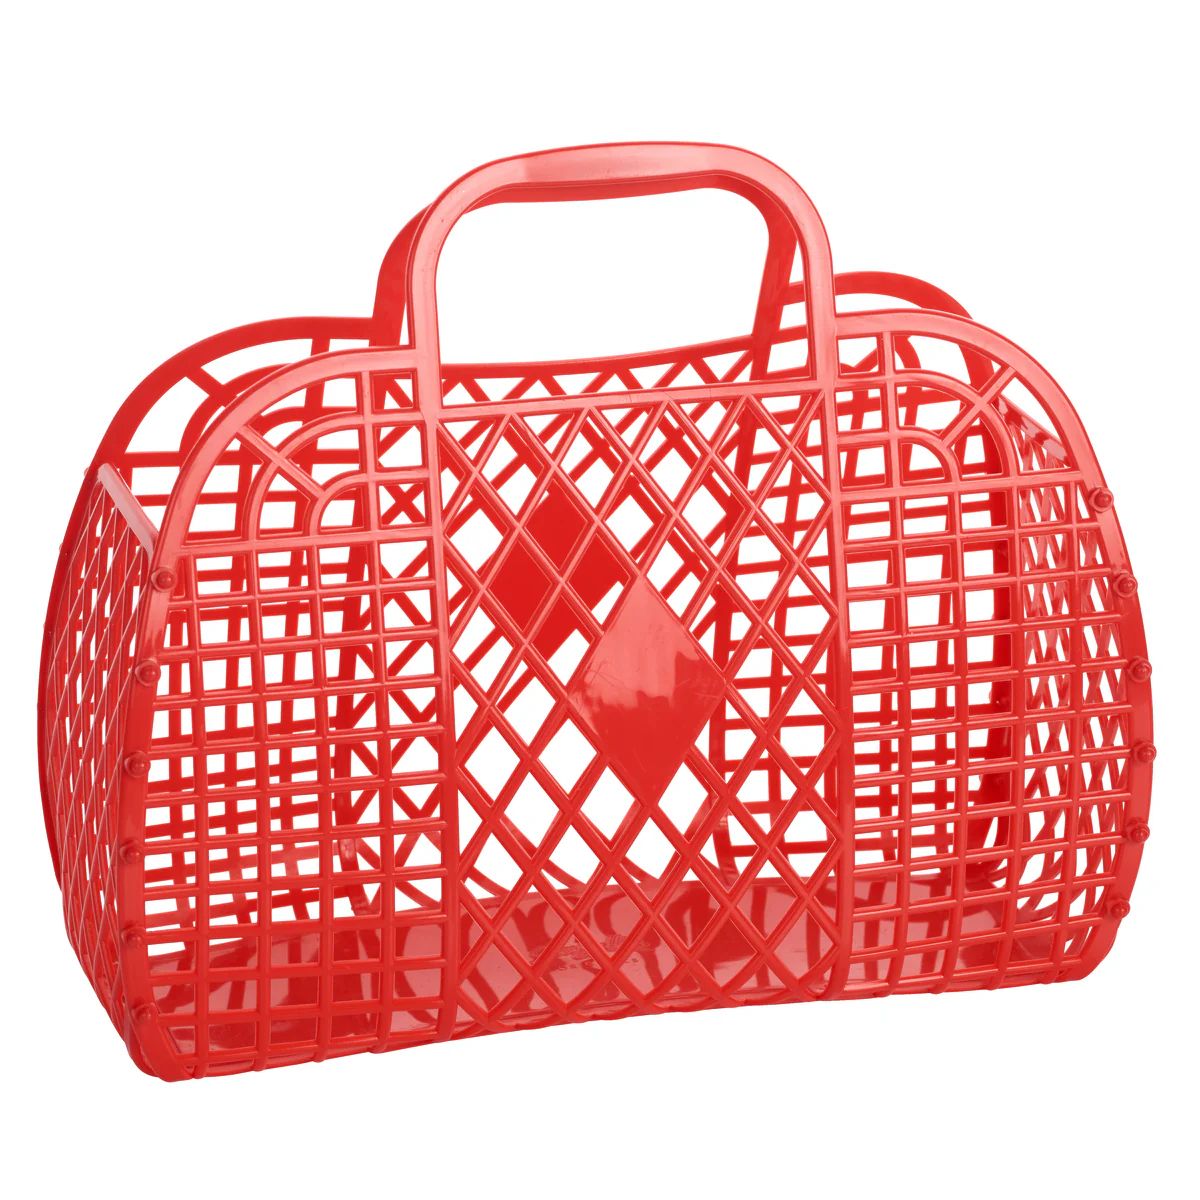 Large Retro Basket - Red | Ellie and Piper